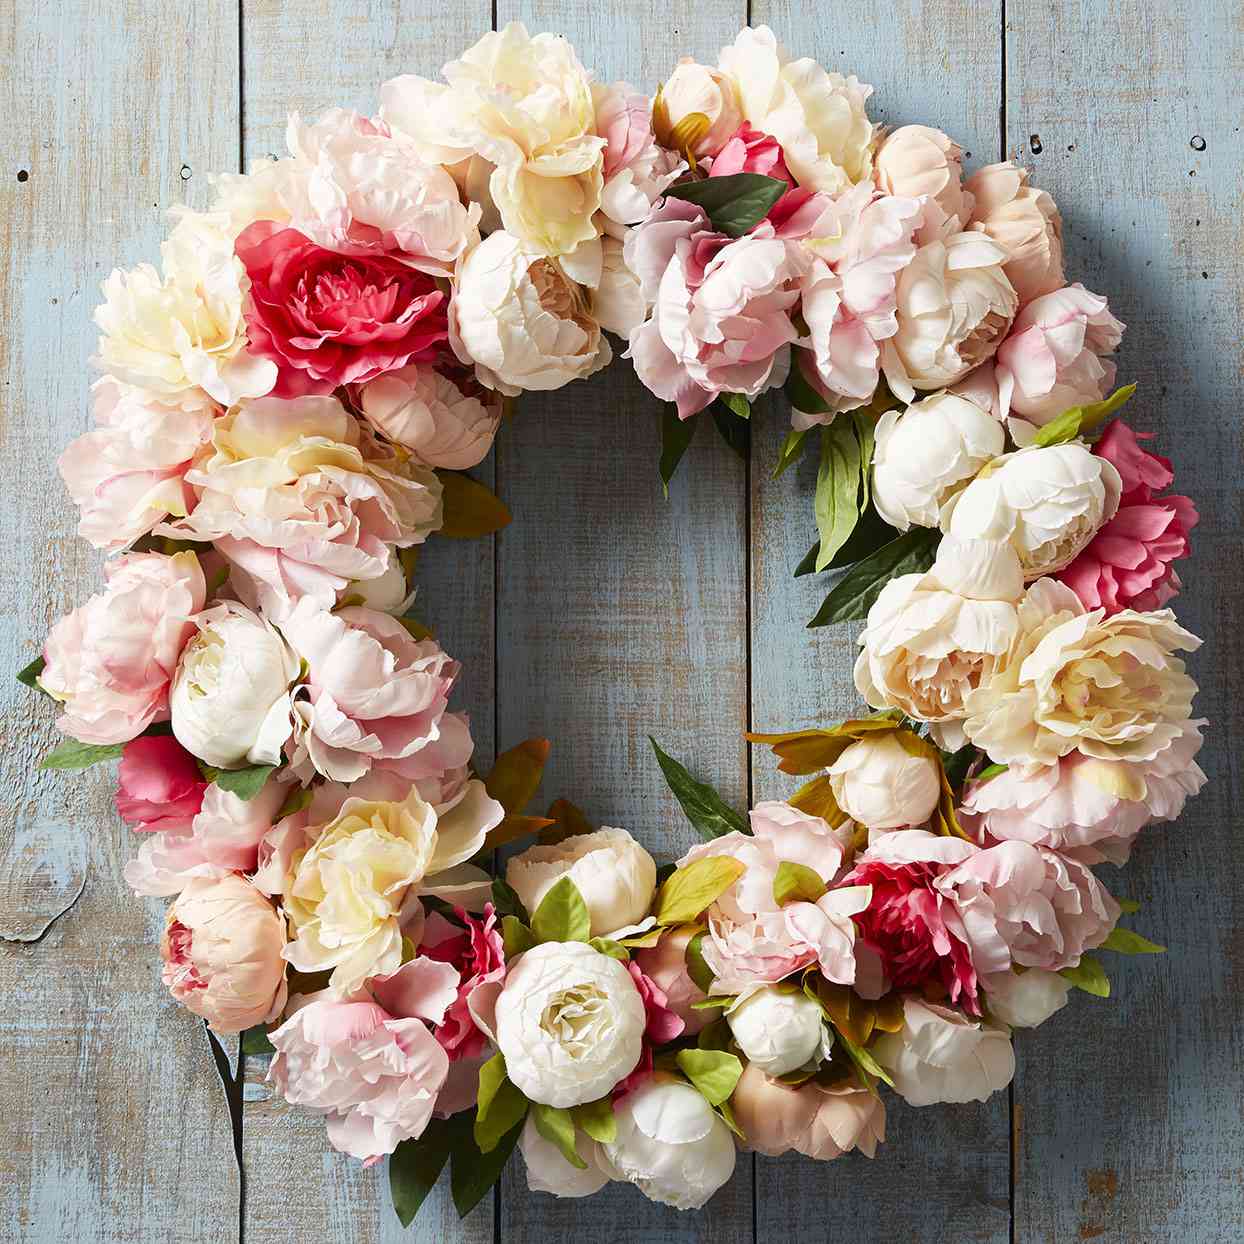 fineshelf Tulip Wreath Artificial Flower Door Wreath Floral Twig Spring Wreath for Easter Wreath Gift Mothers Day Wedding Party Decoration Wall Hanging Ornament